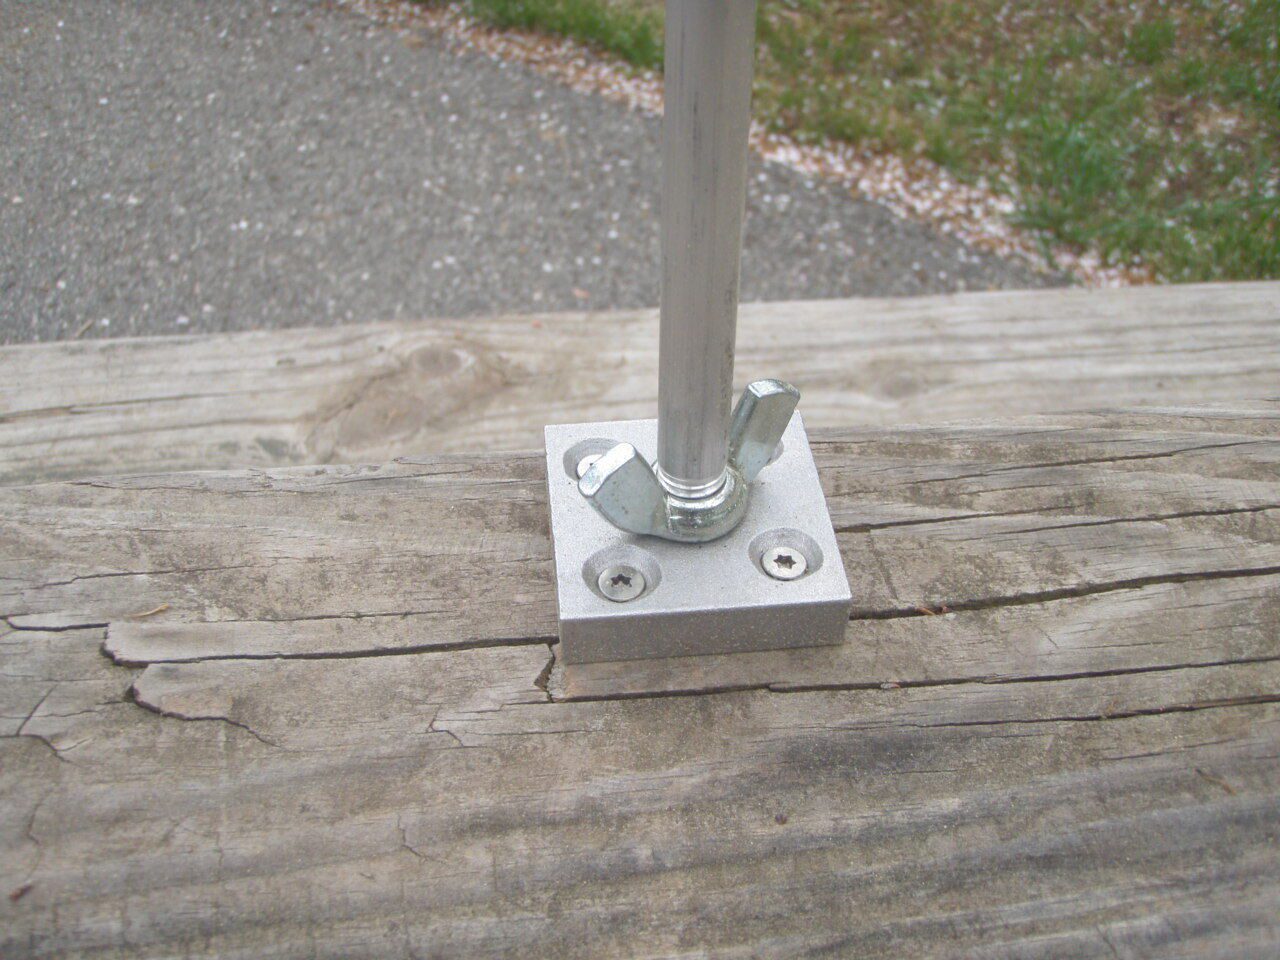 A close up of the base on a wooden deck